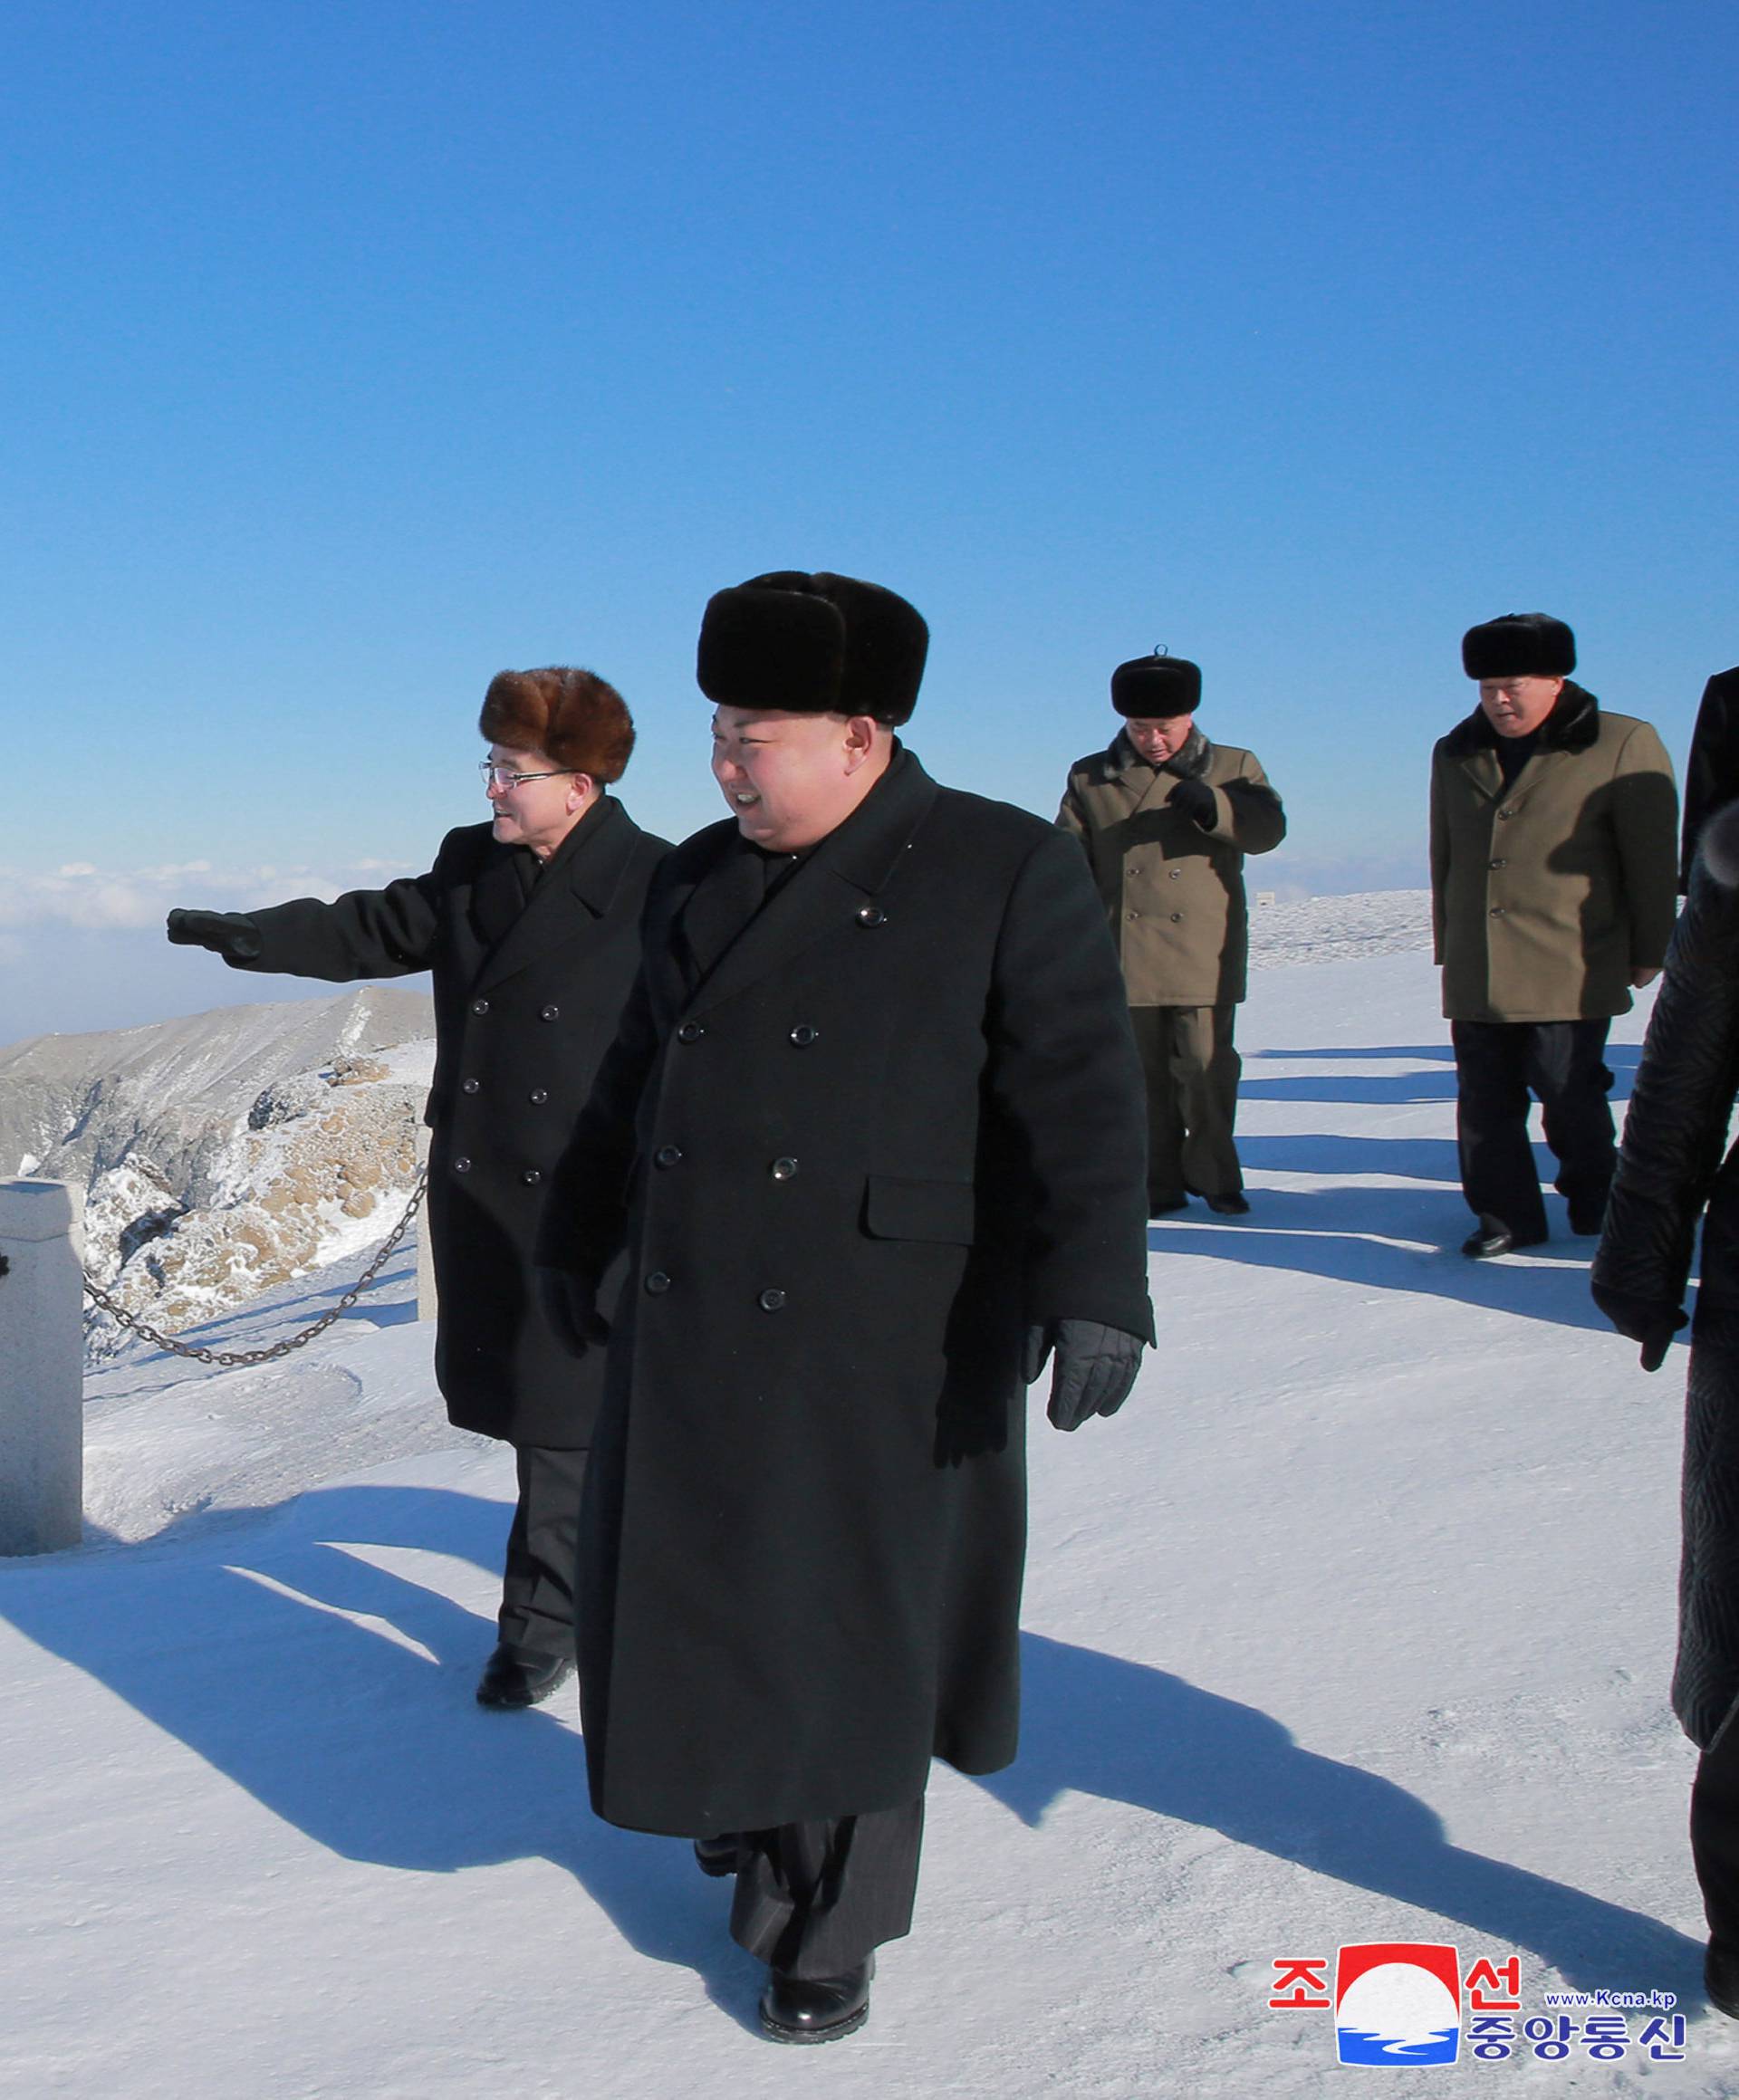 North Korean leader Kim Jong Un visits Mount Paektu in this photo released by North Korea's KCNA